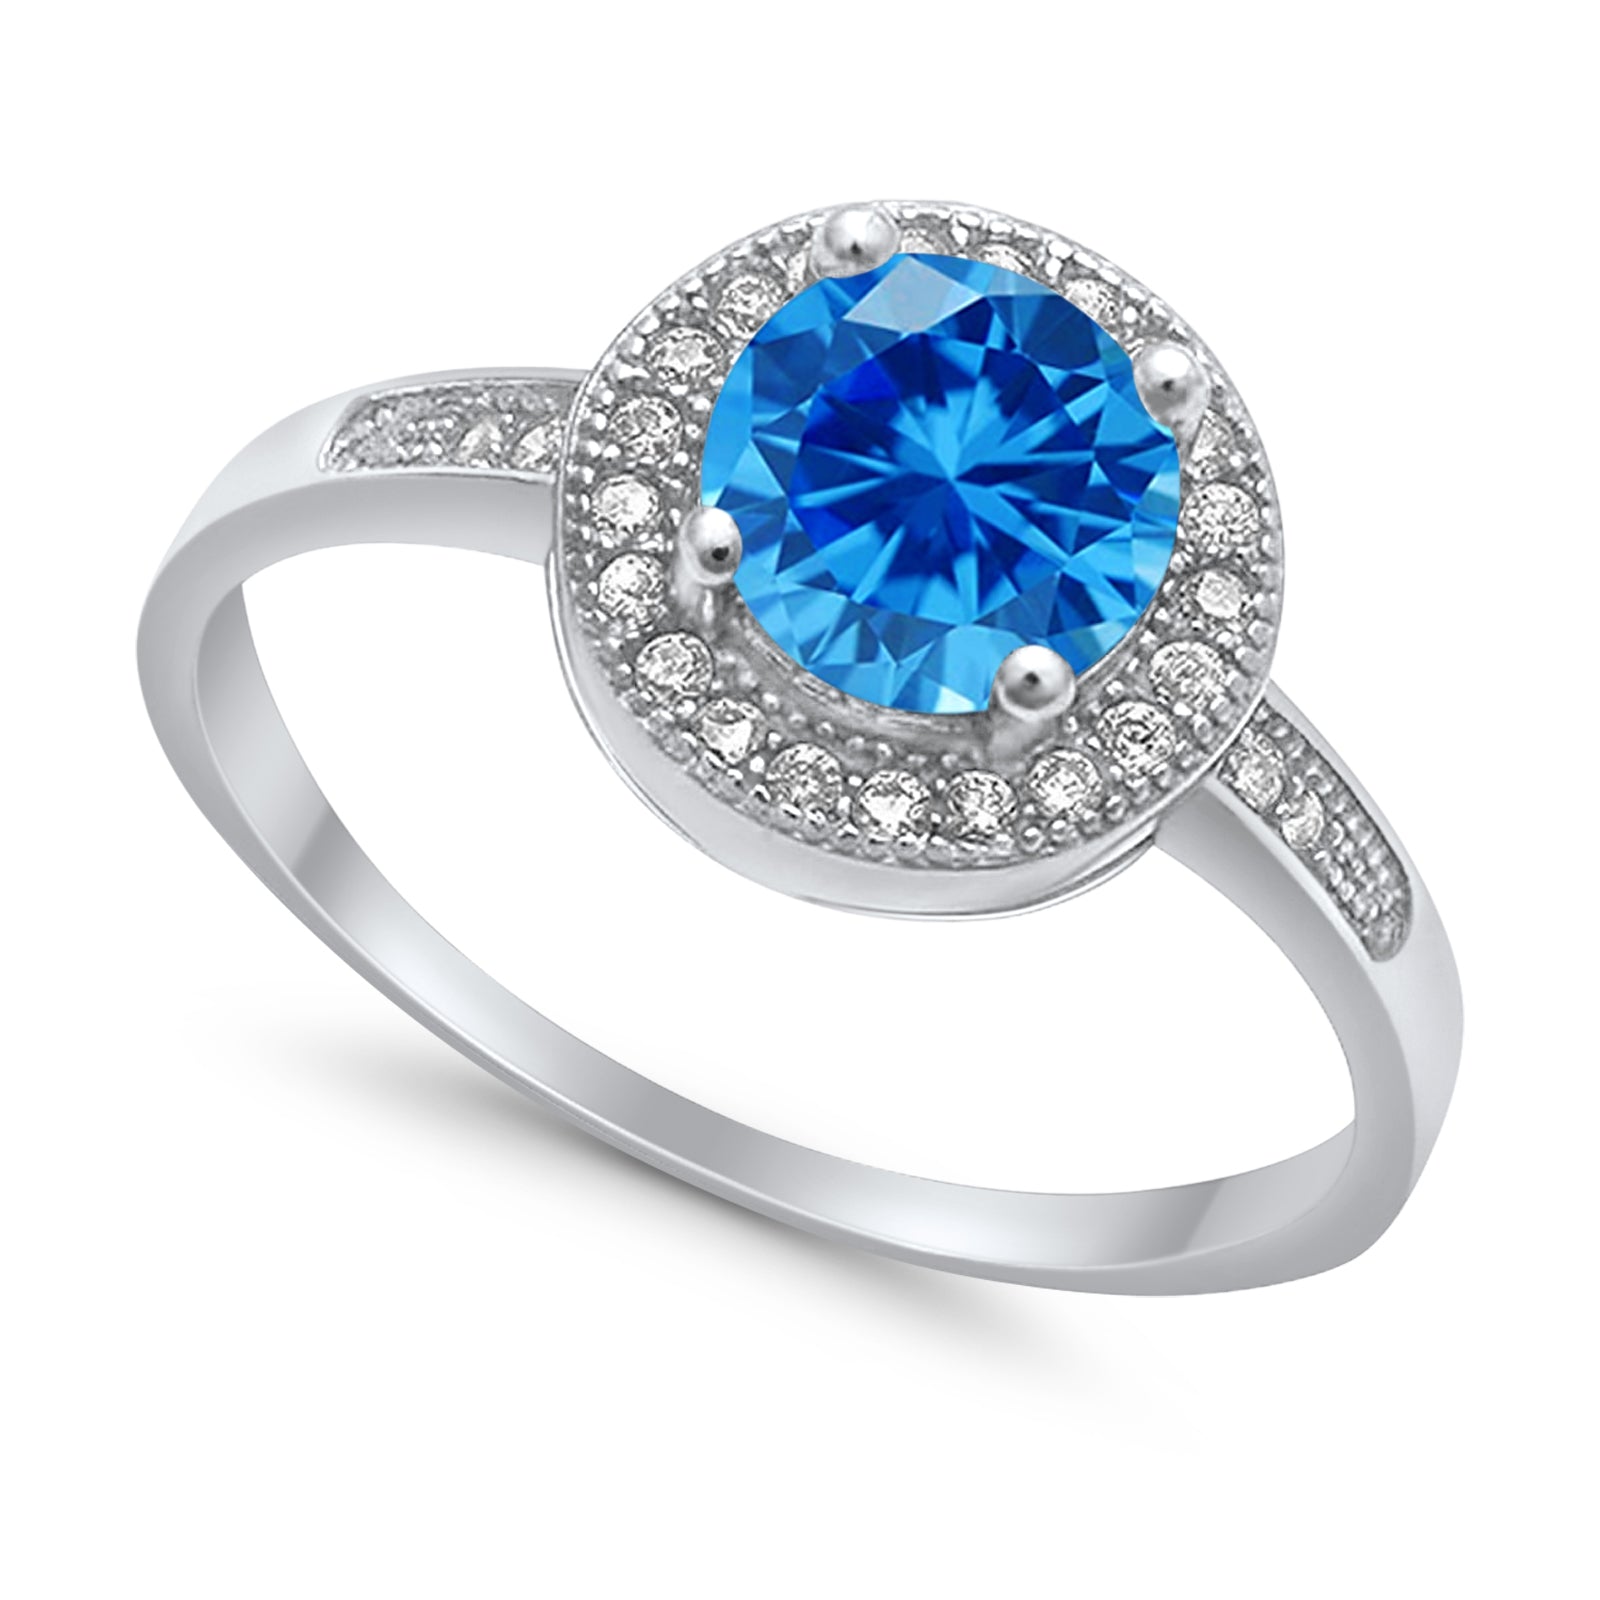 Halo Wedding Ring Round Simulated Blue Topaz CZ 925 Sterling Silver